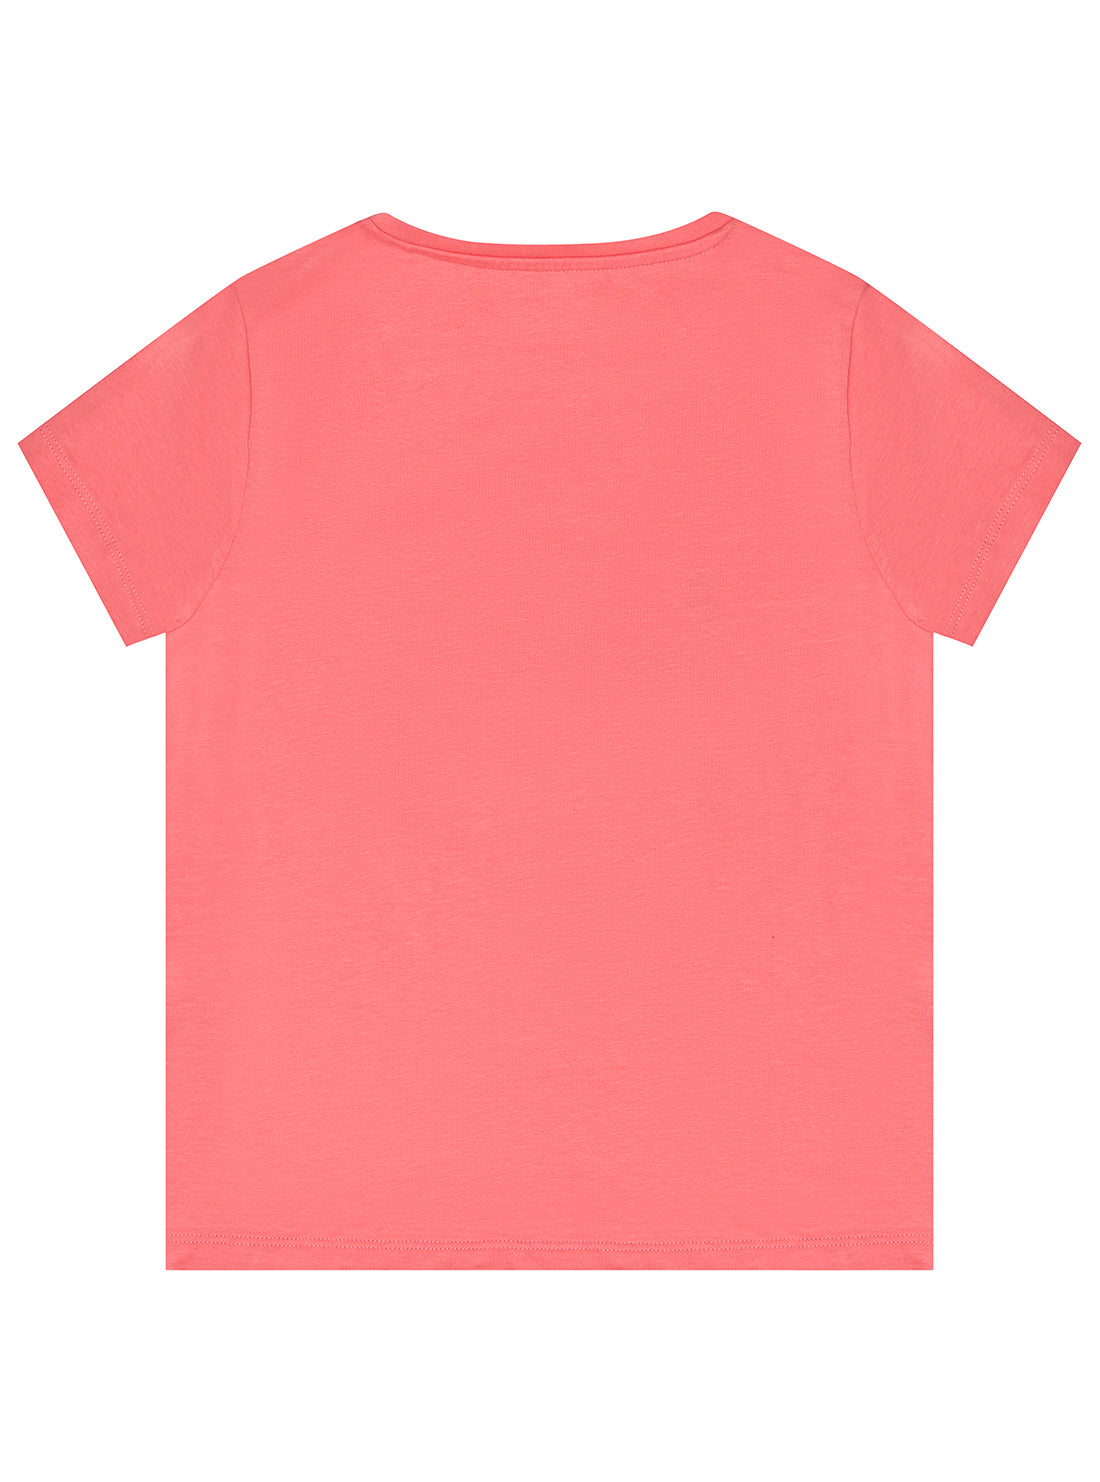 Girl's Coral Pink Glitter Logo T-Shirt back view